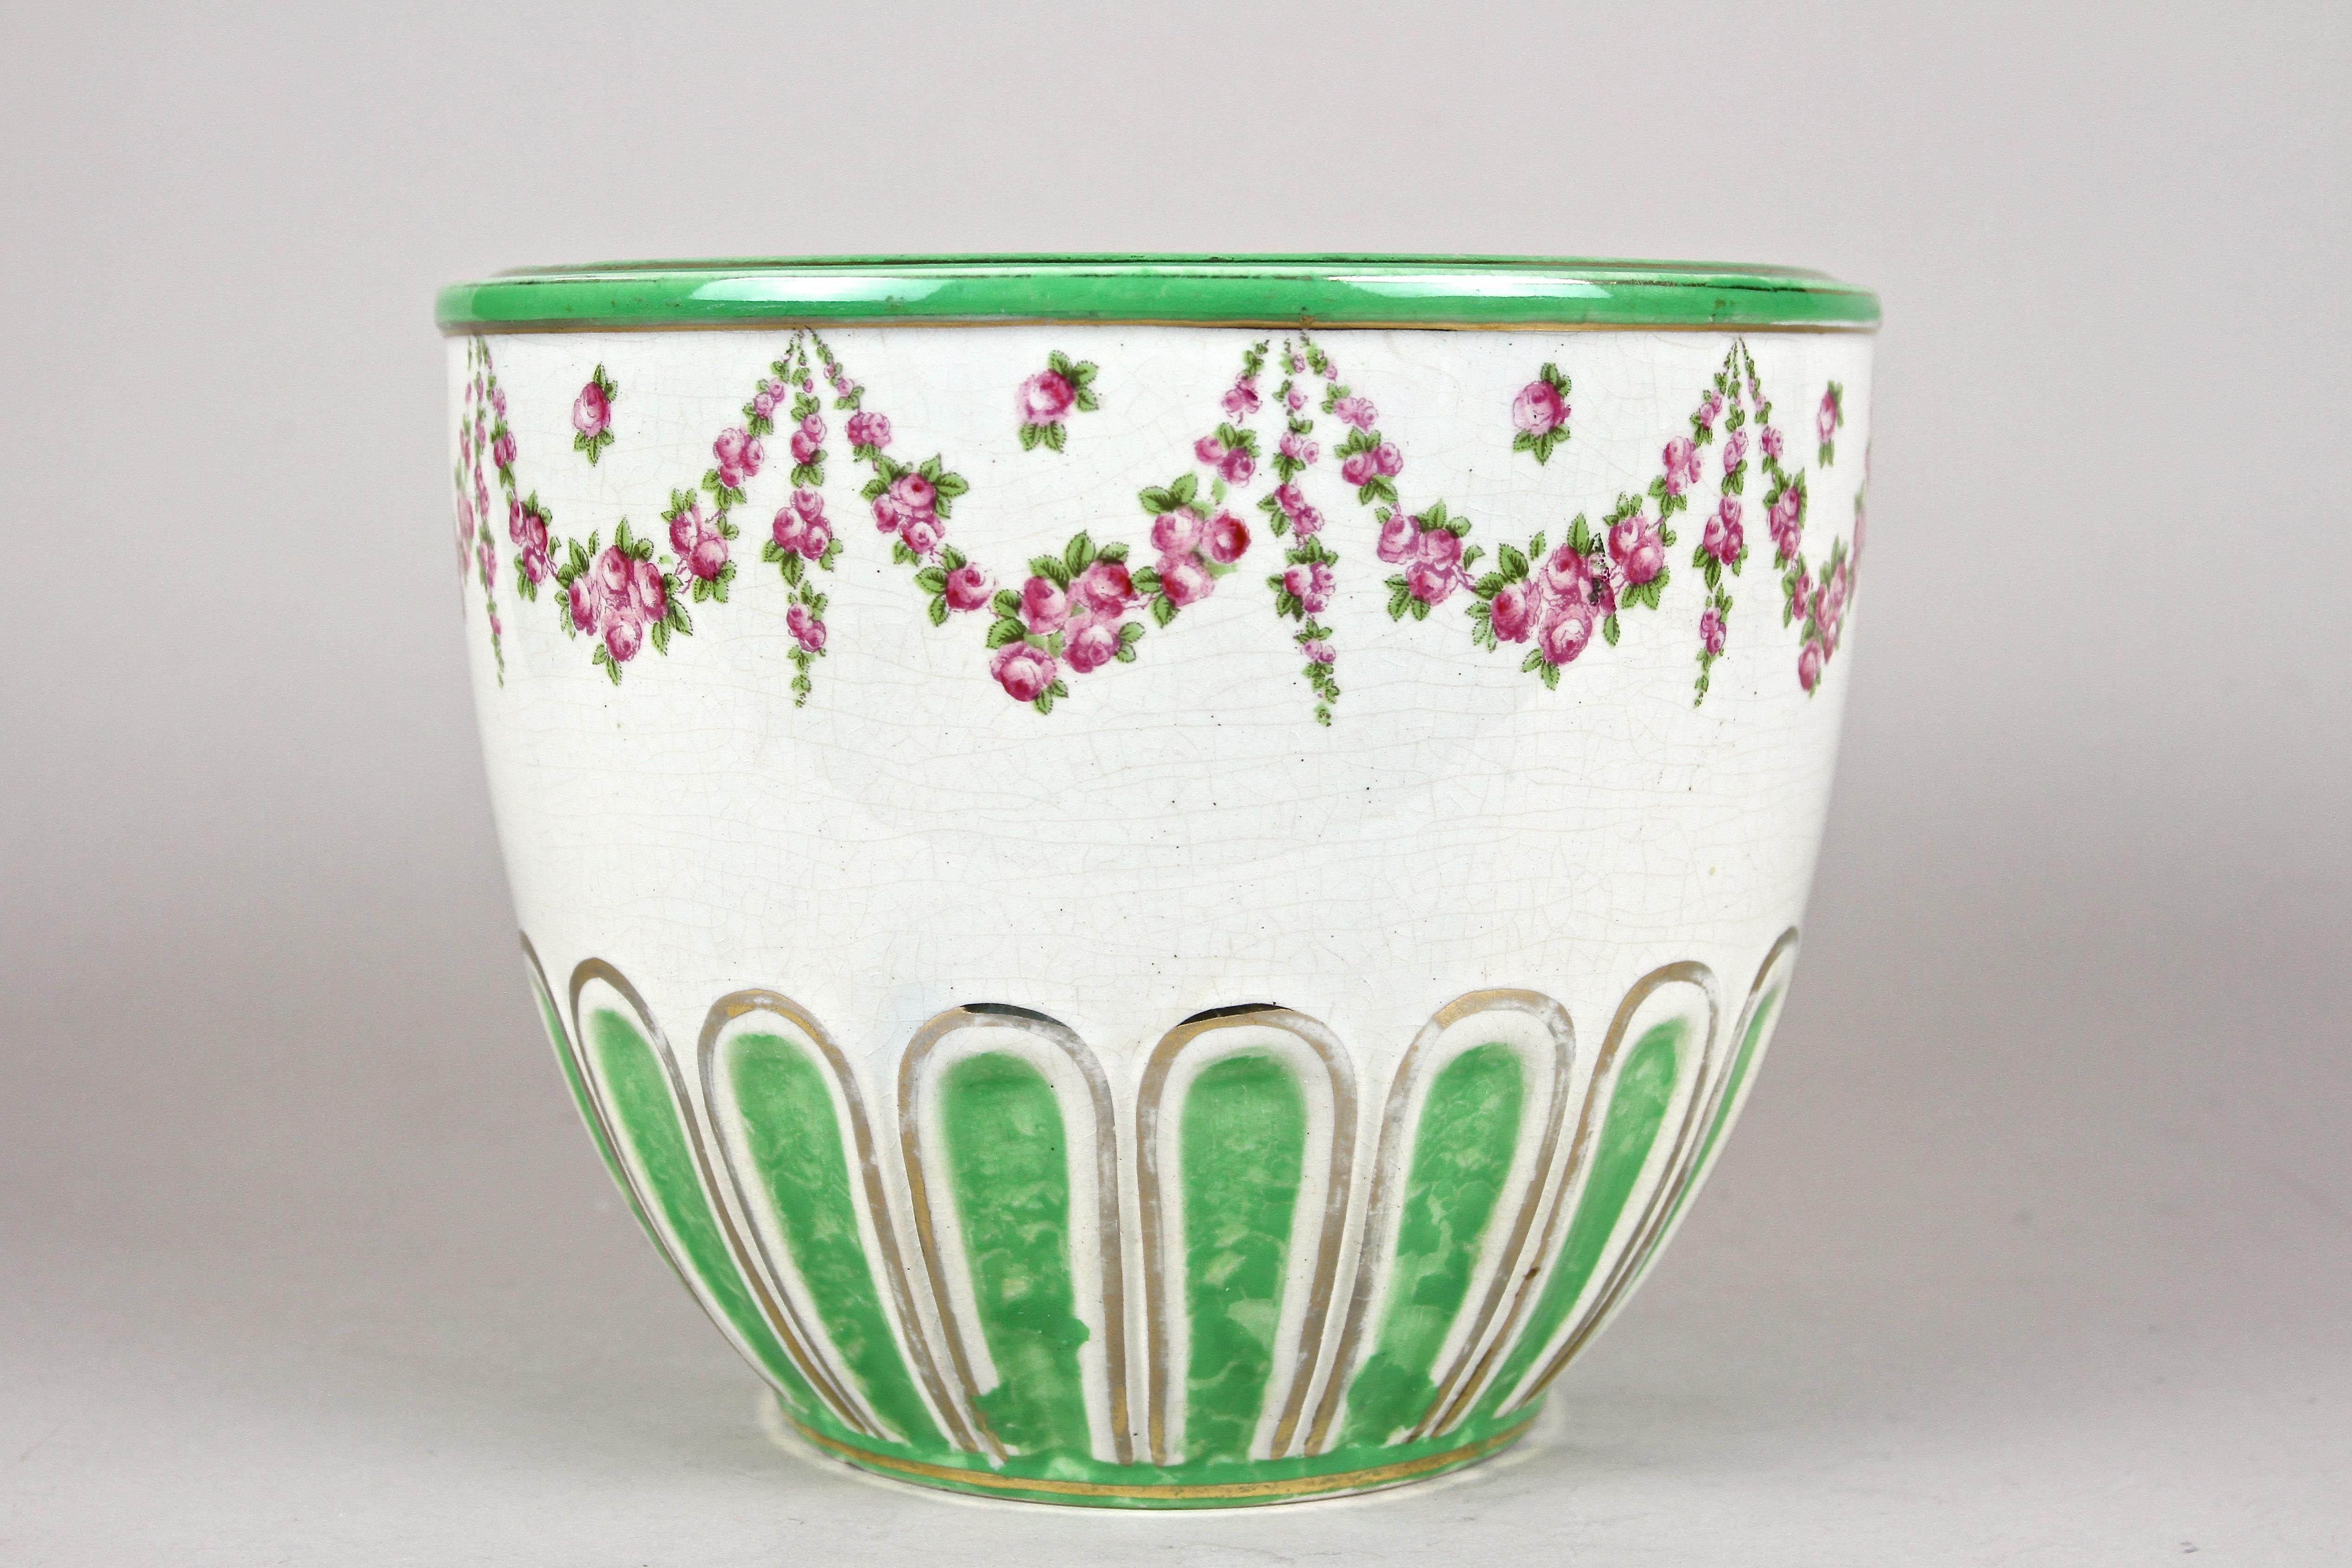 Lovely Art Nouveau ceramic planter made by the english company of George Jones & Sons (also known under the trade name 